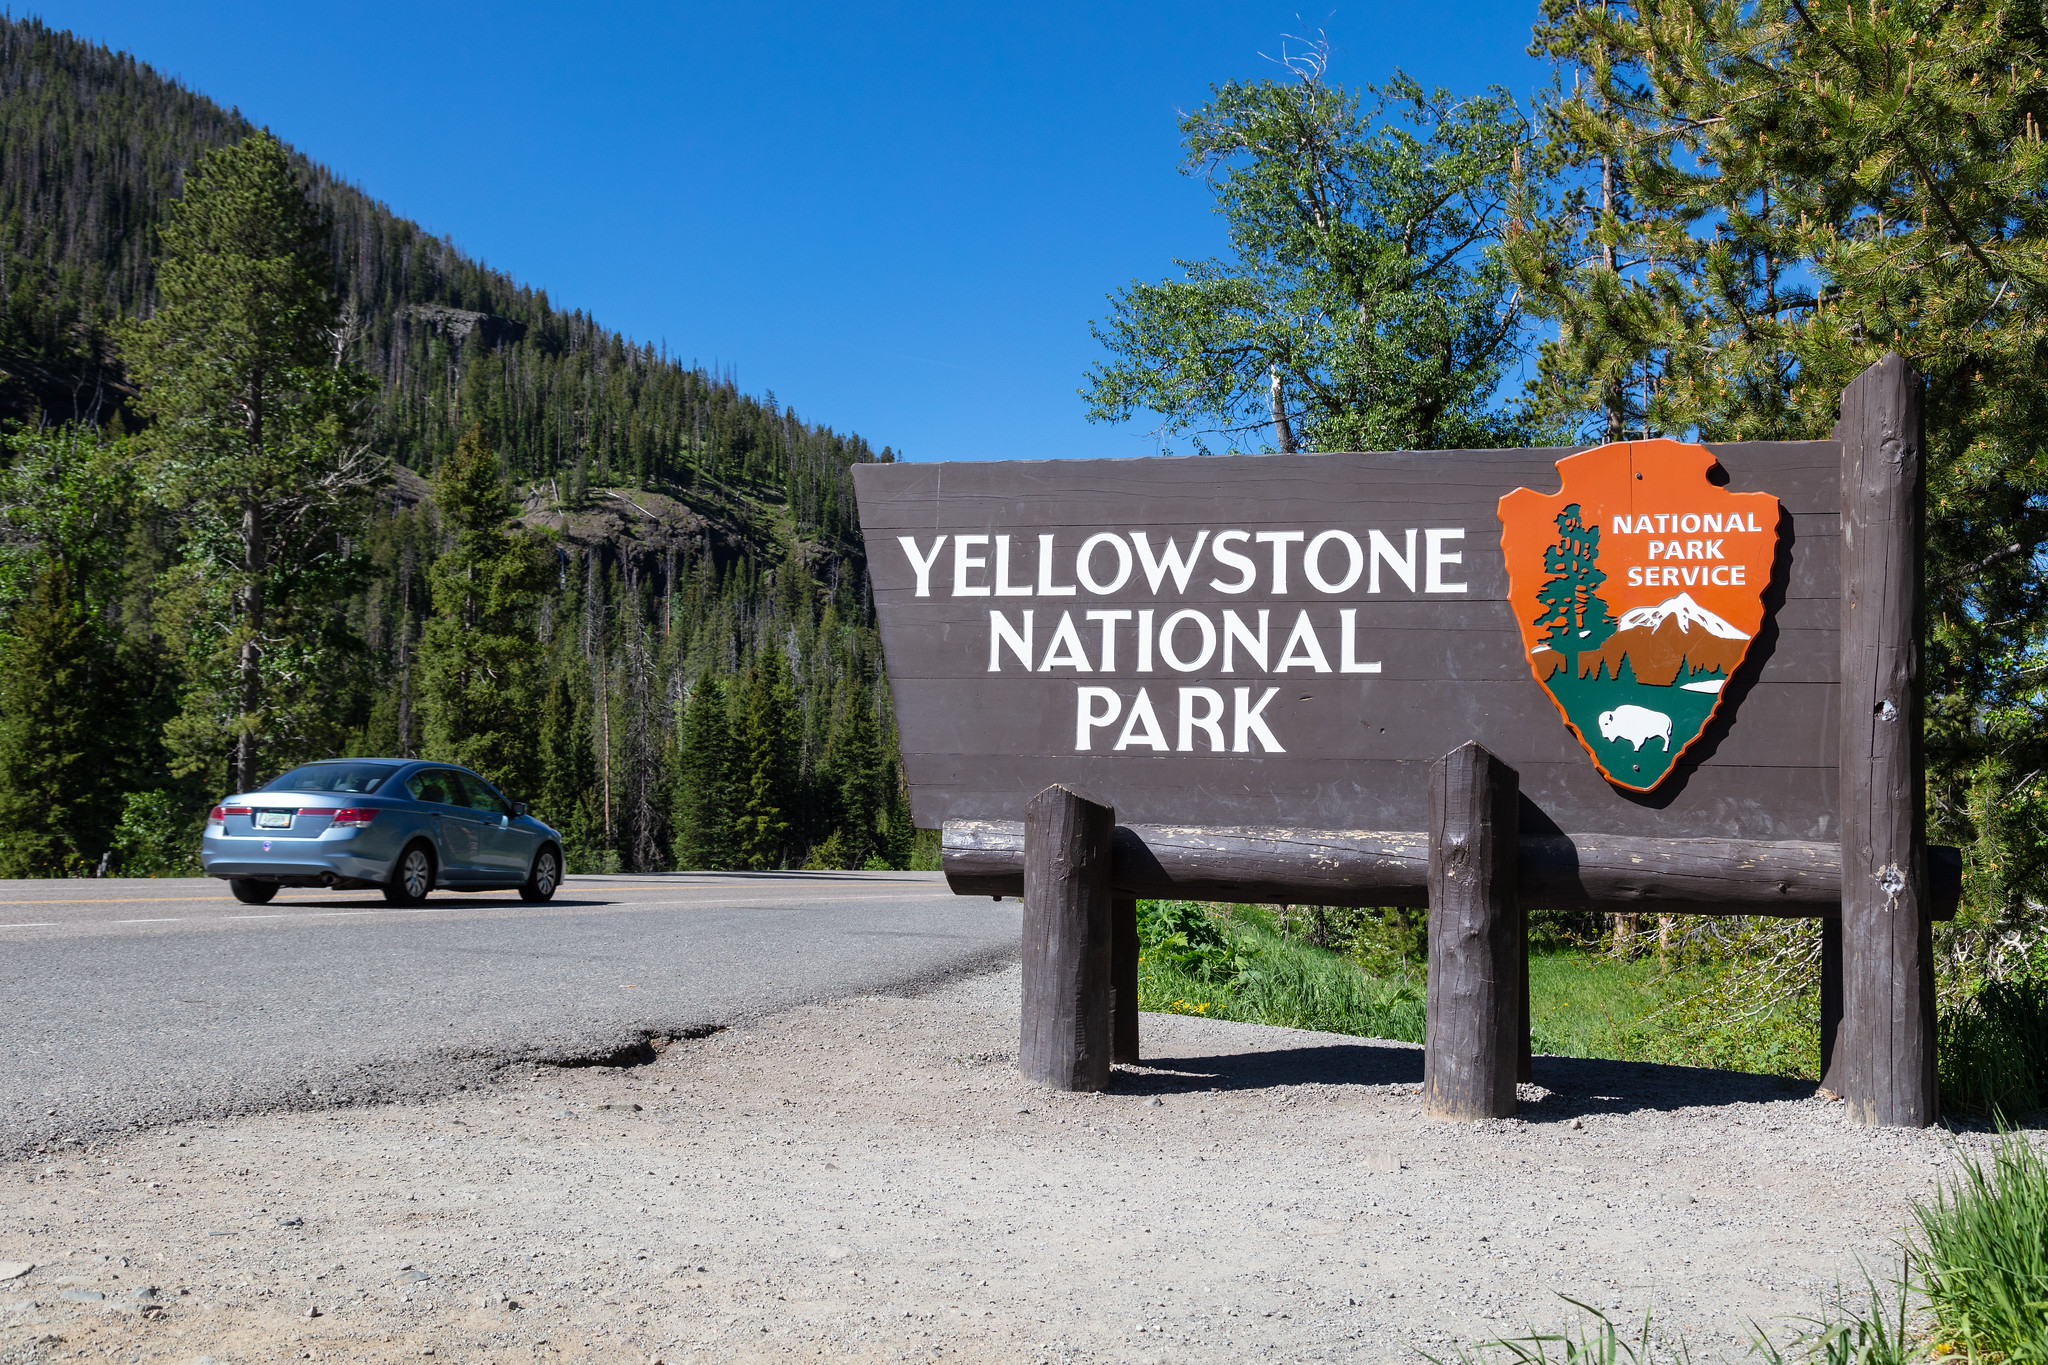 Yellowstone National Park entrance road sign